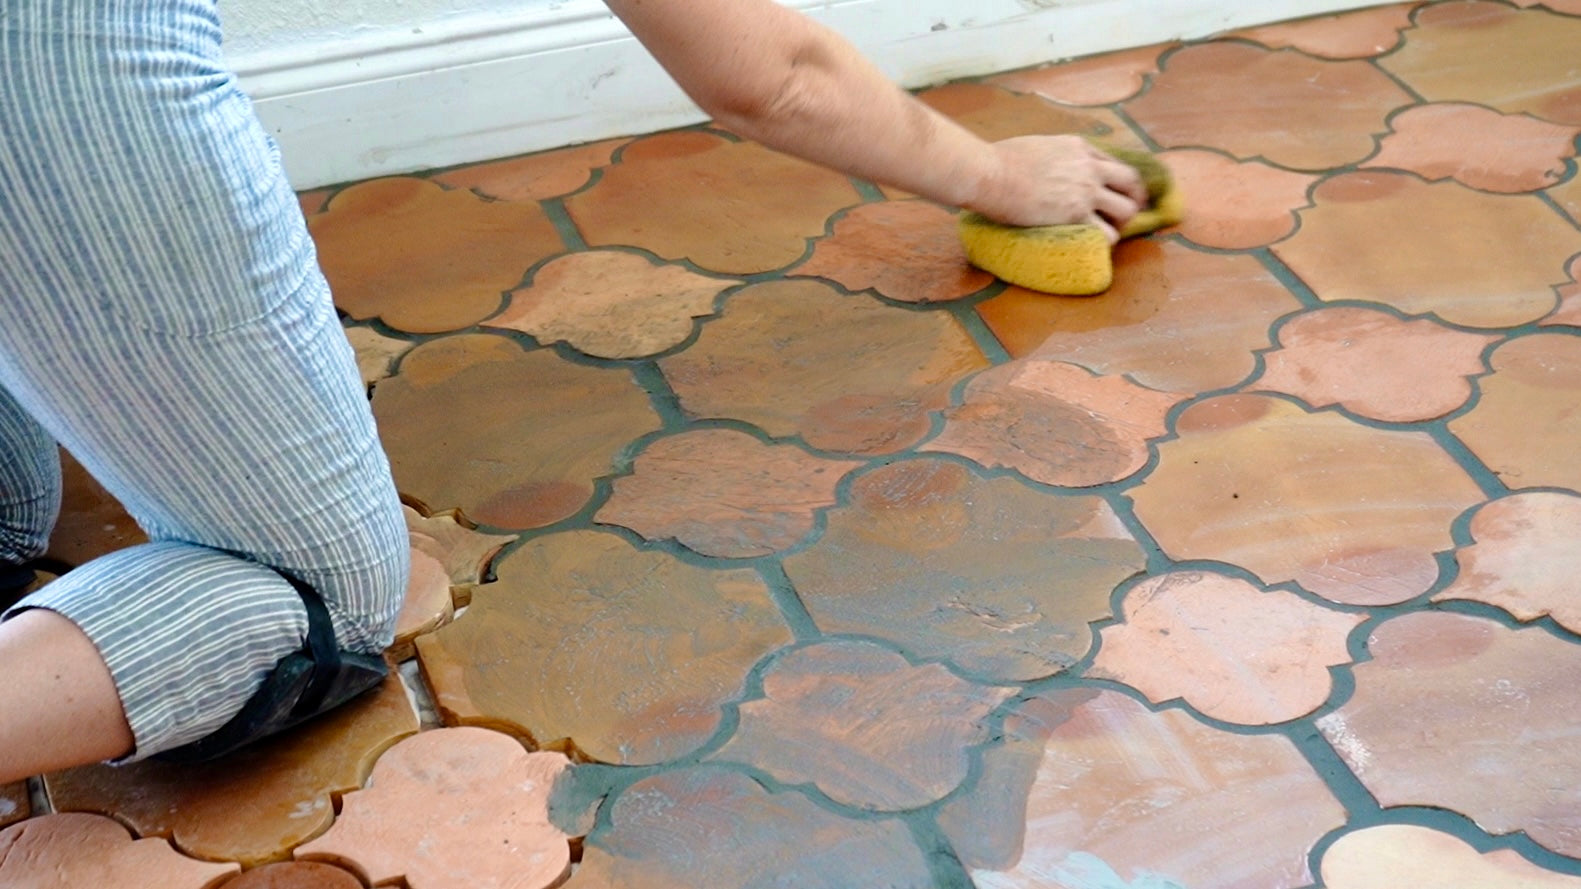 Person on knees scrubbing terracotta shaped tile floor clay imports